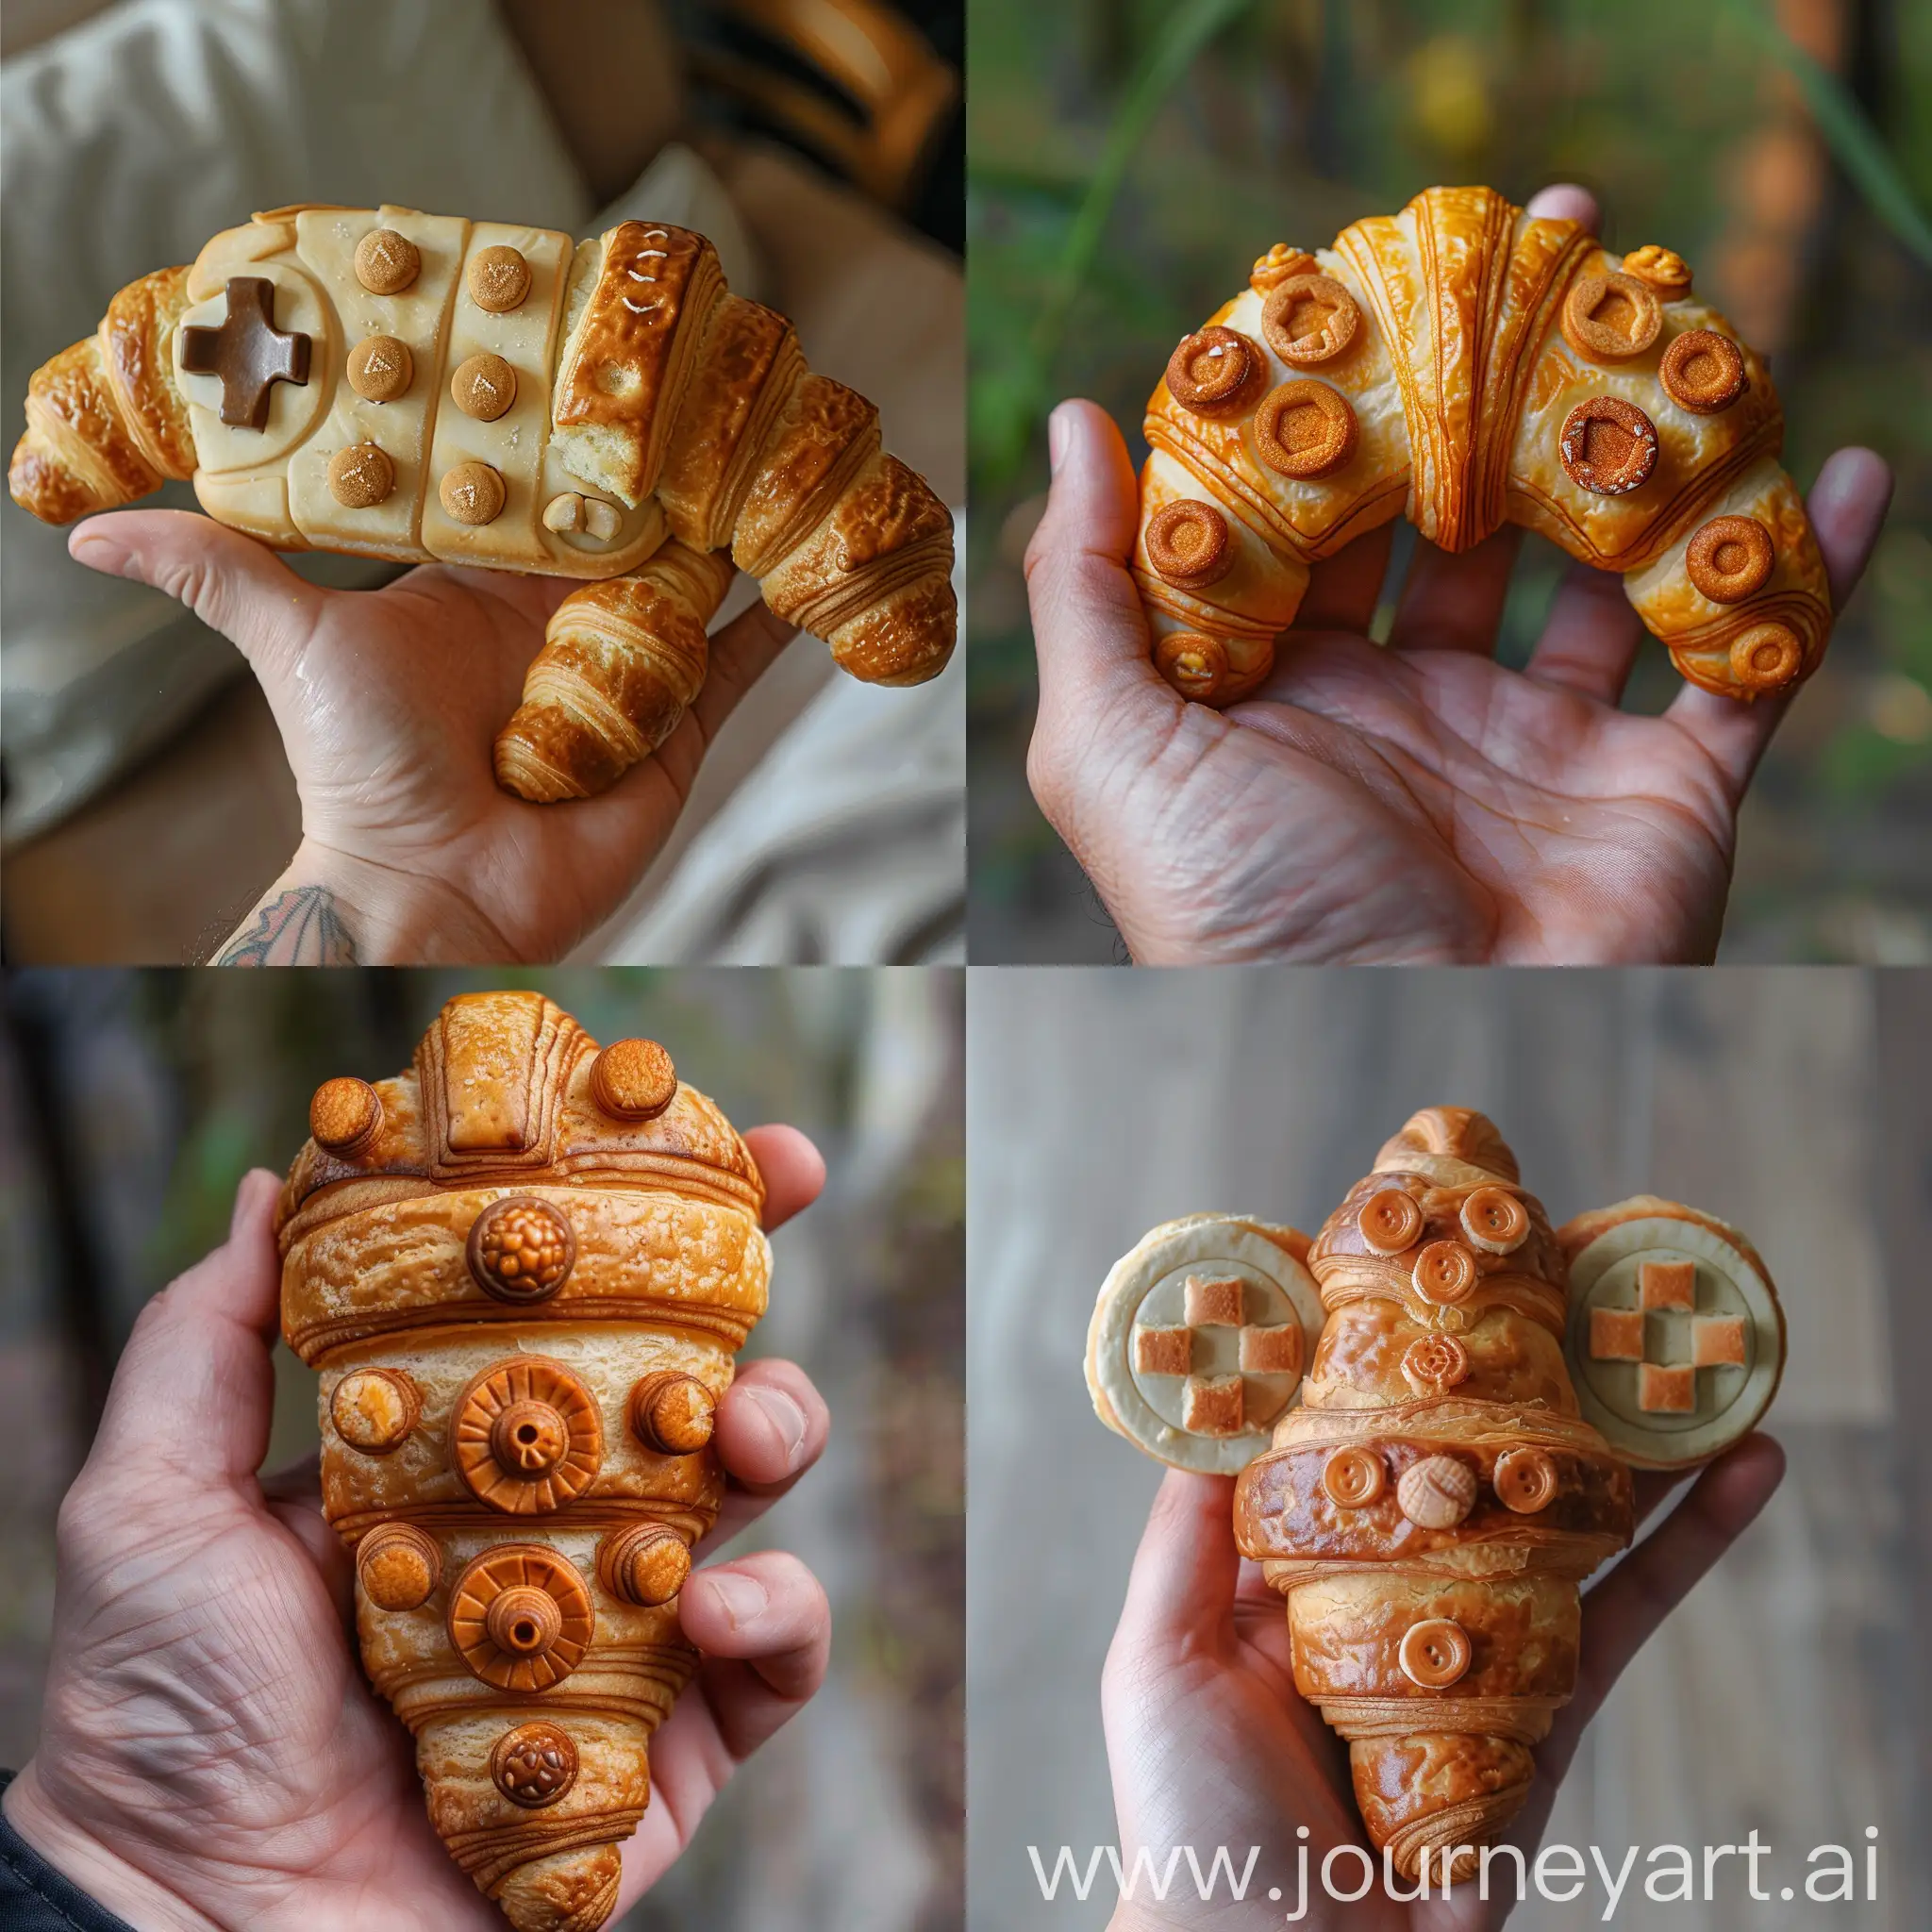 hand holds a delicious croissant in the form of a gaming joystick with buttons made of bread